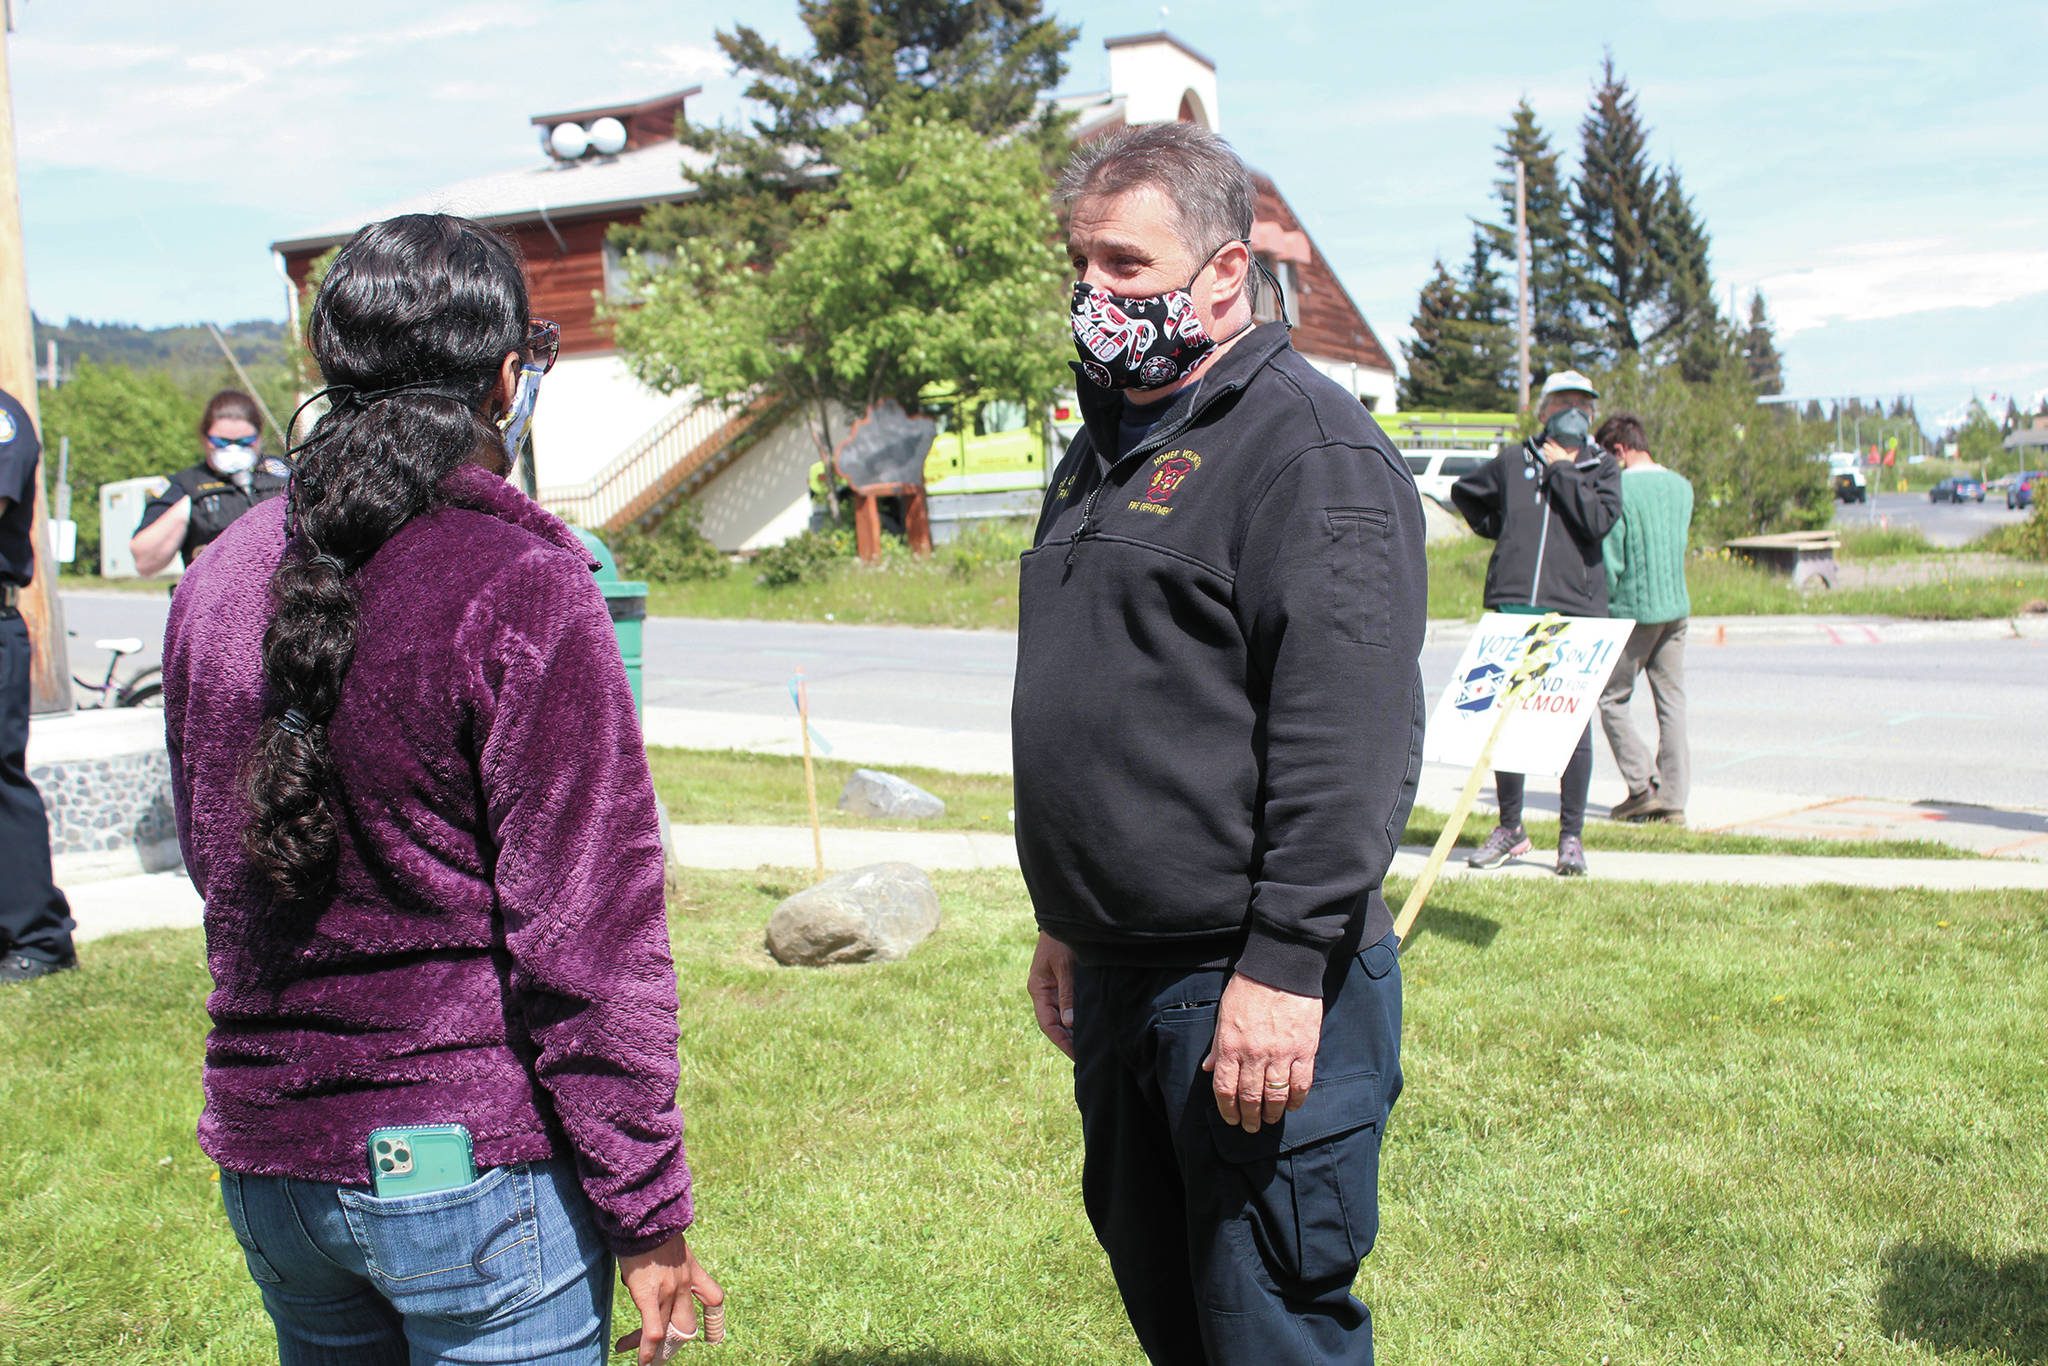 Winter Marshall-Allen (left) speaks with Homer Volunteer Fire Department Chief Mark Kirko during a protest supporting the Black Lives Matter movement Thursday, June 4, 2020 at WKFL Park in Homer, Alaska. (Photo by Megan Pacer/Homer News)